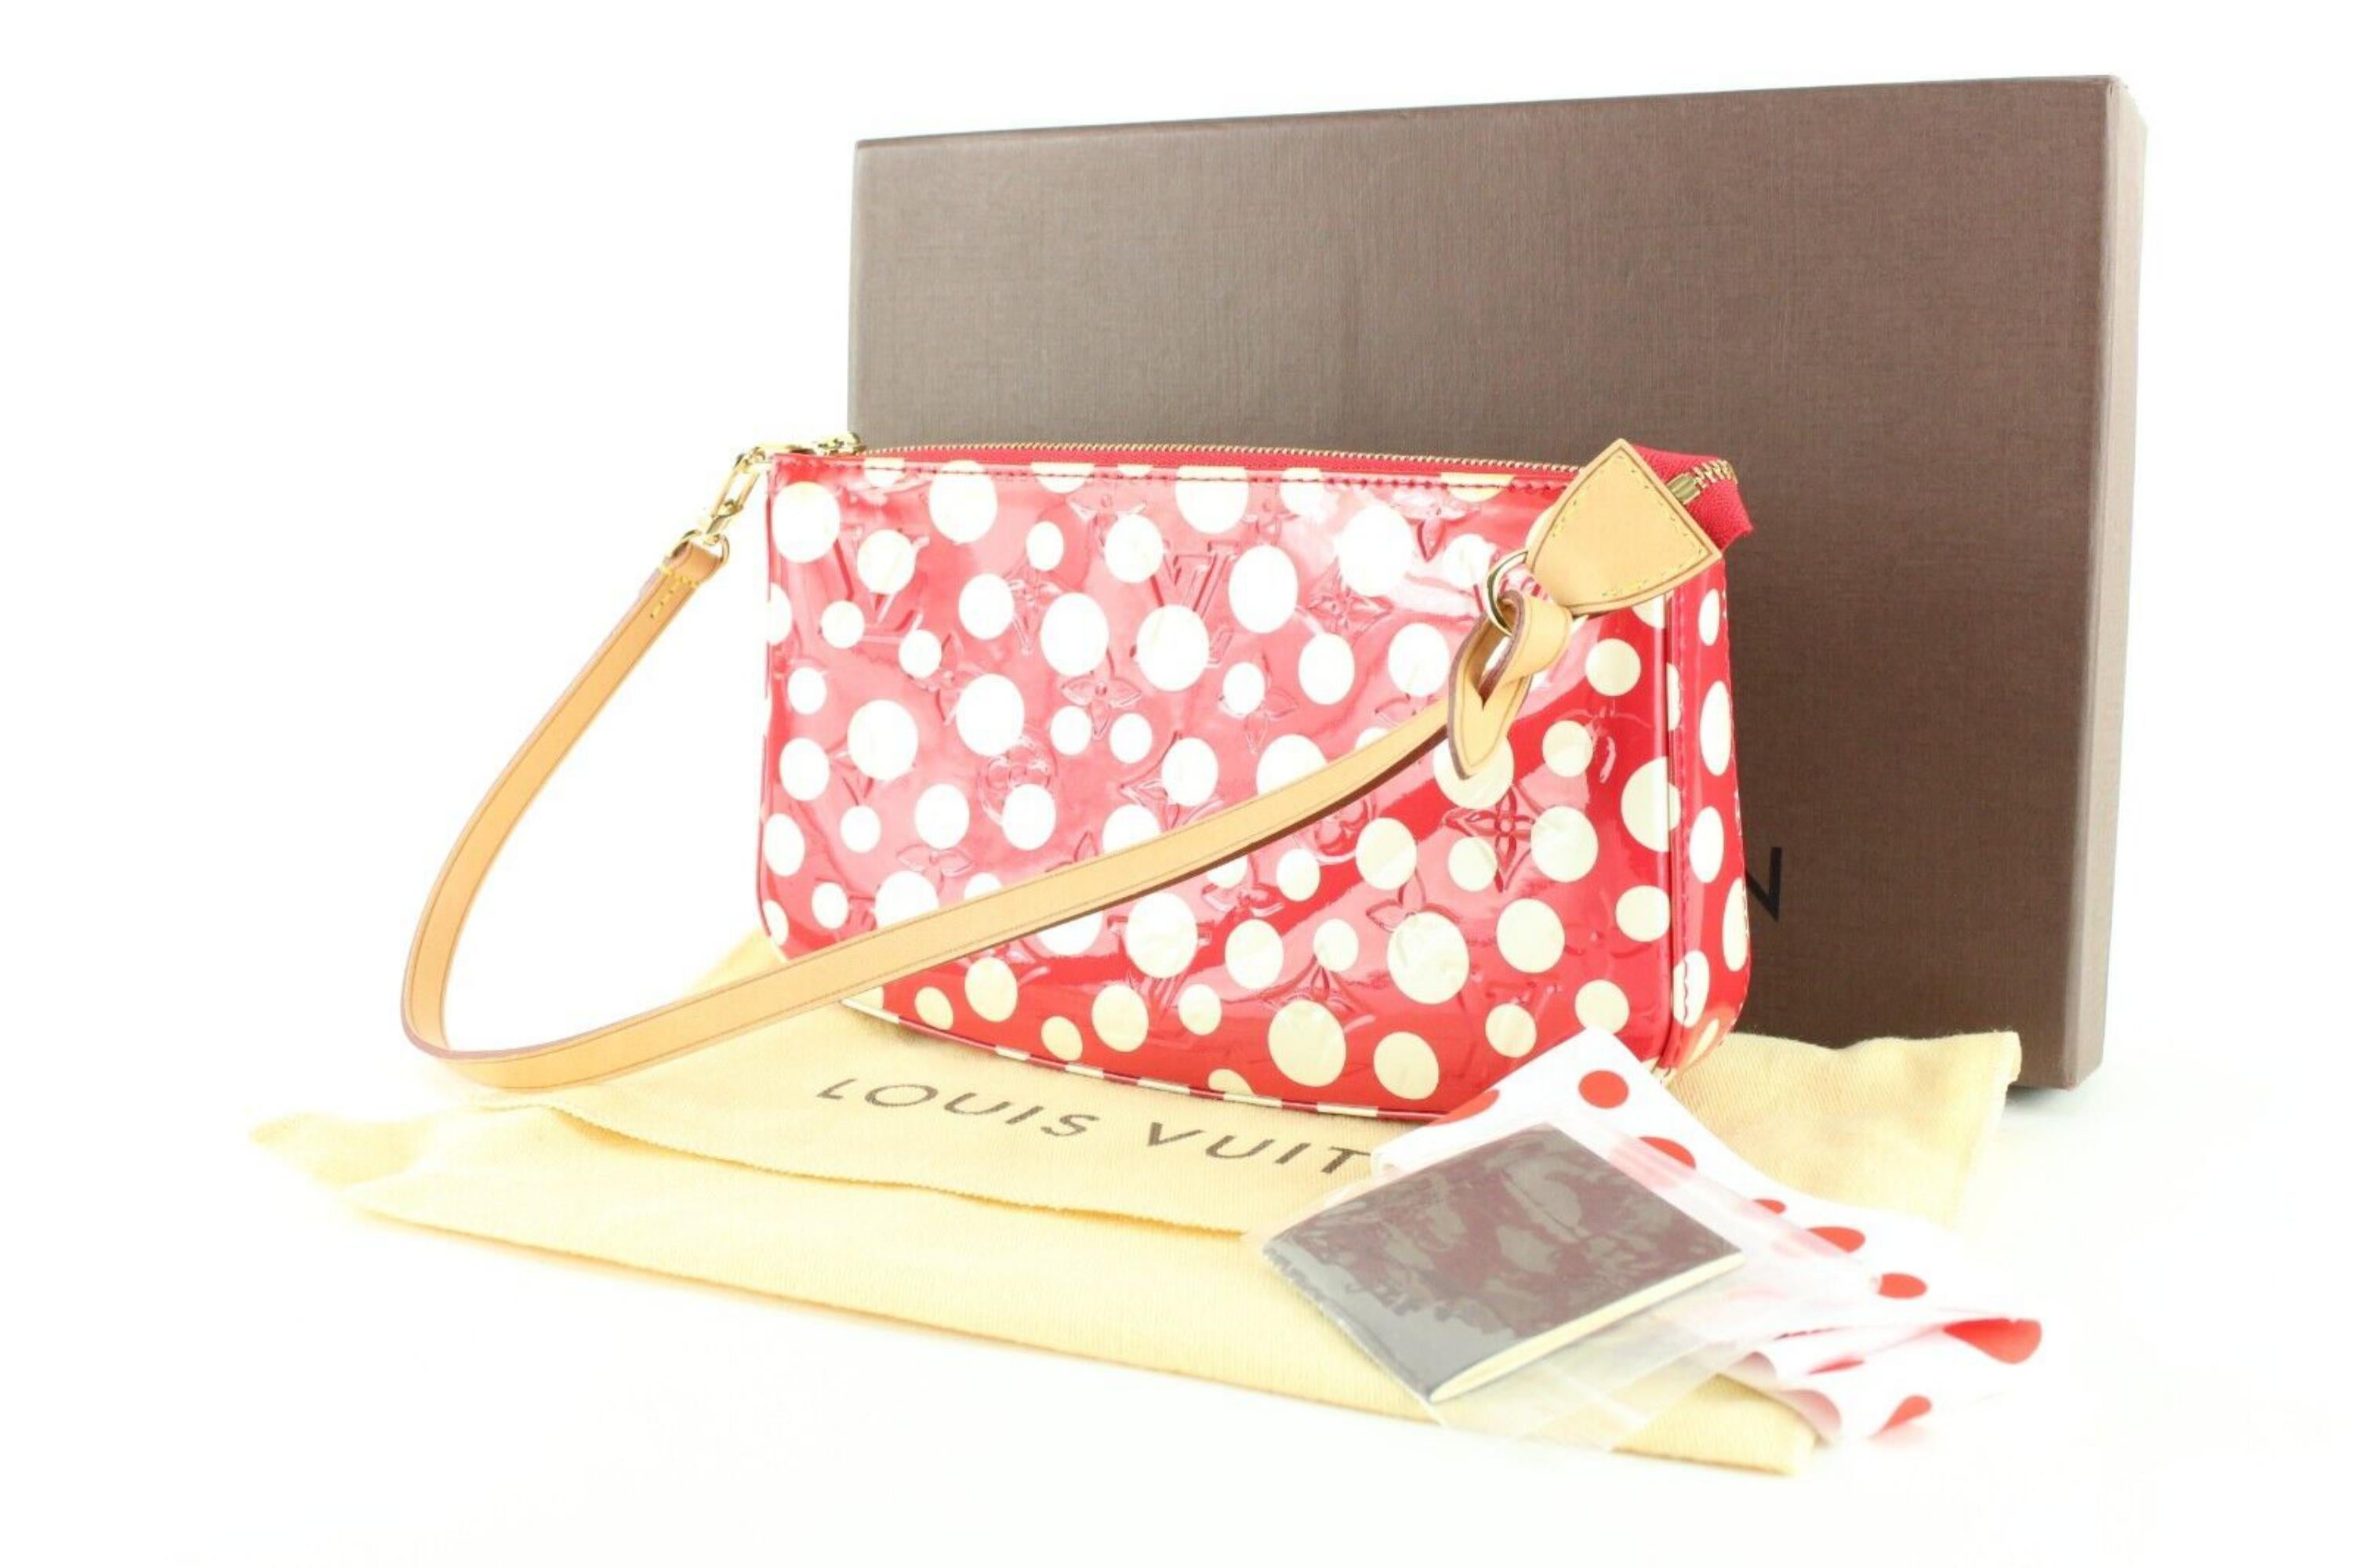 Louis Vuitton Kusama Infinity Red Dots Vernis Pochette Accessoires 4LVJ0406
Date Code/Serial Number: DR2102

Made In: France

Measurements: Length:  8